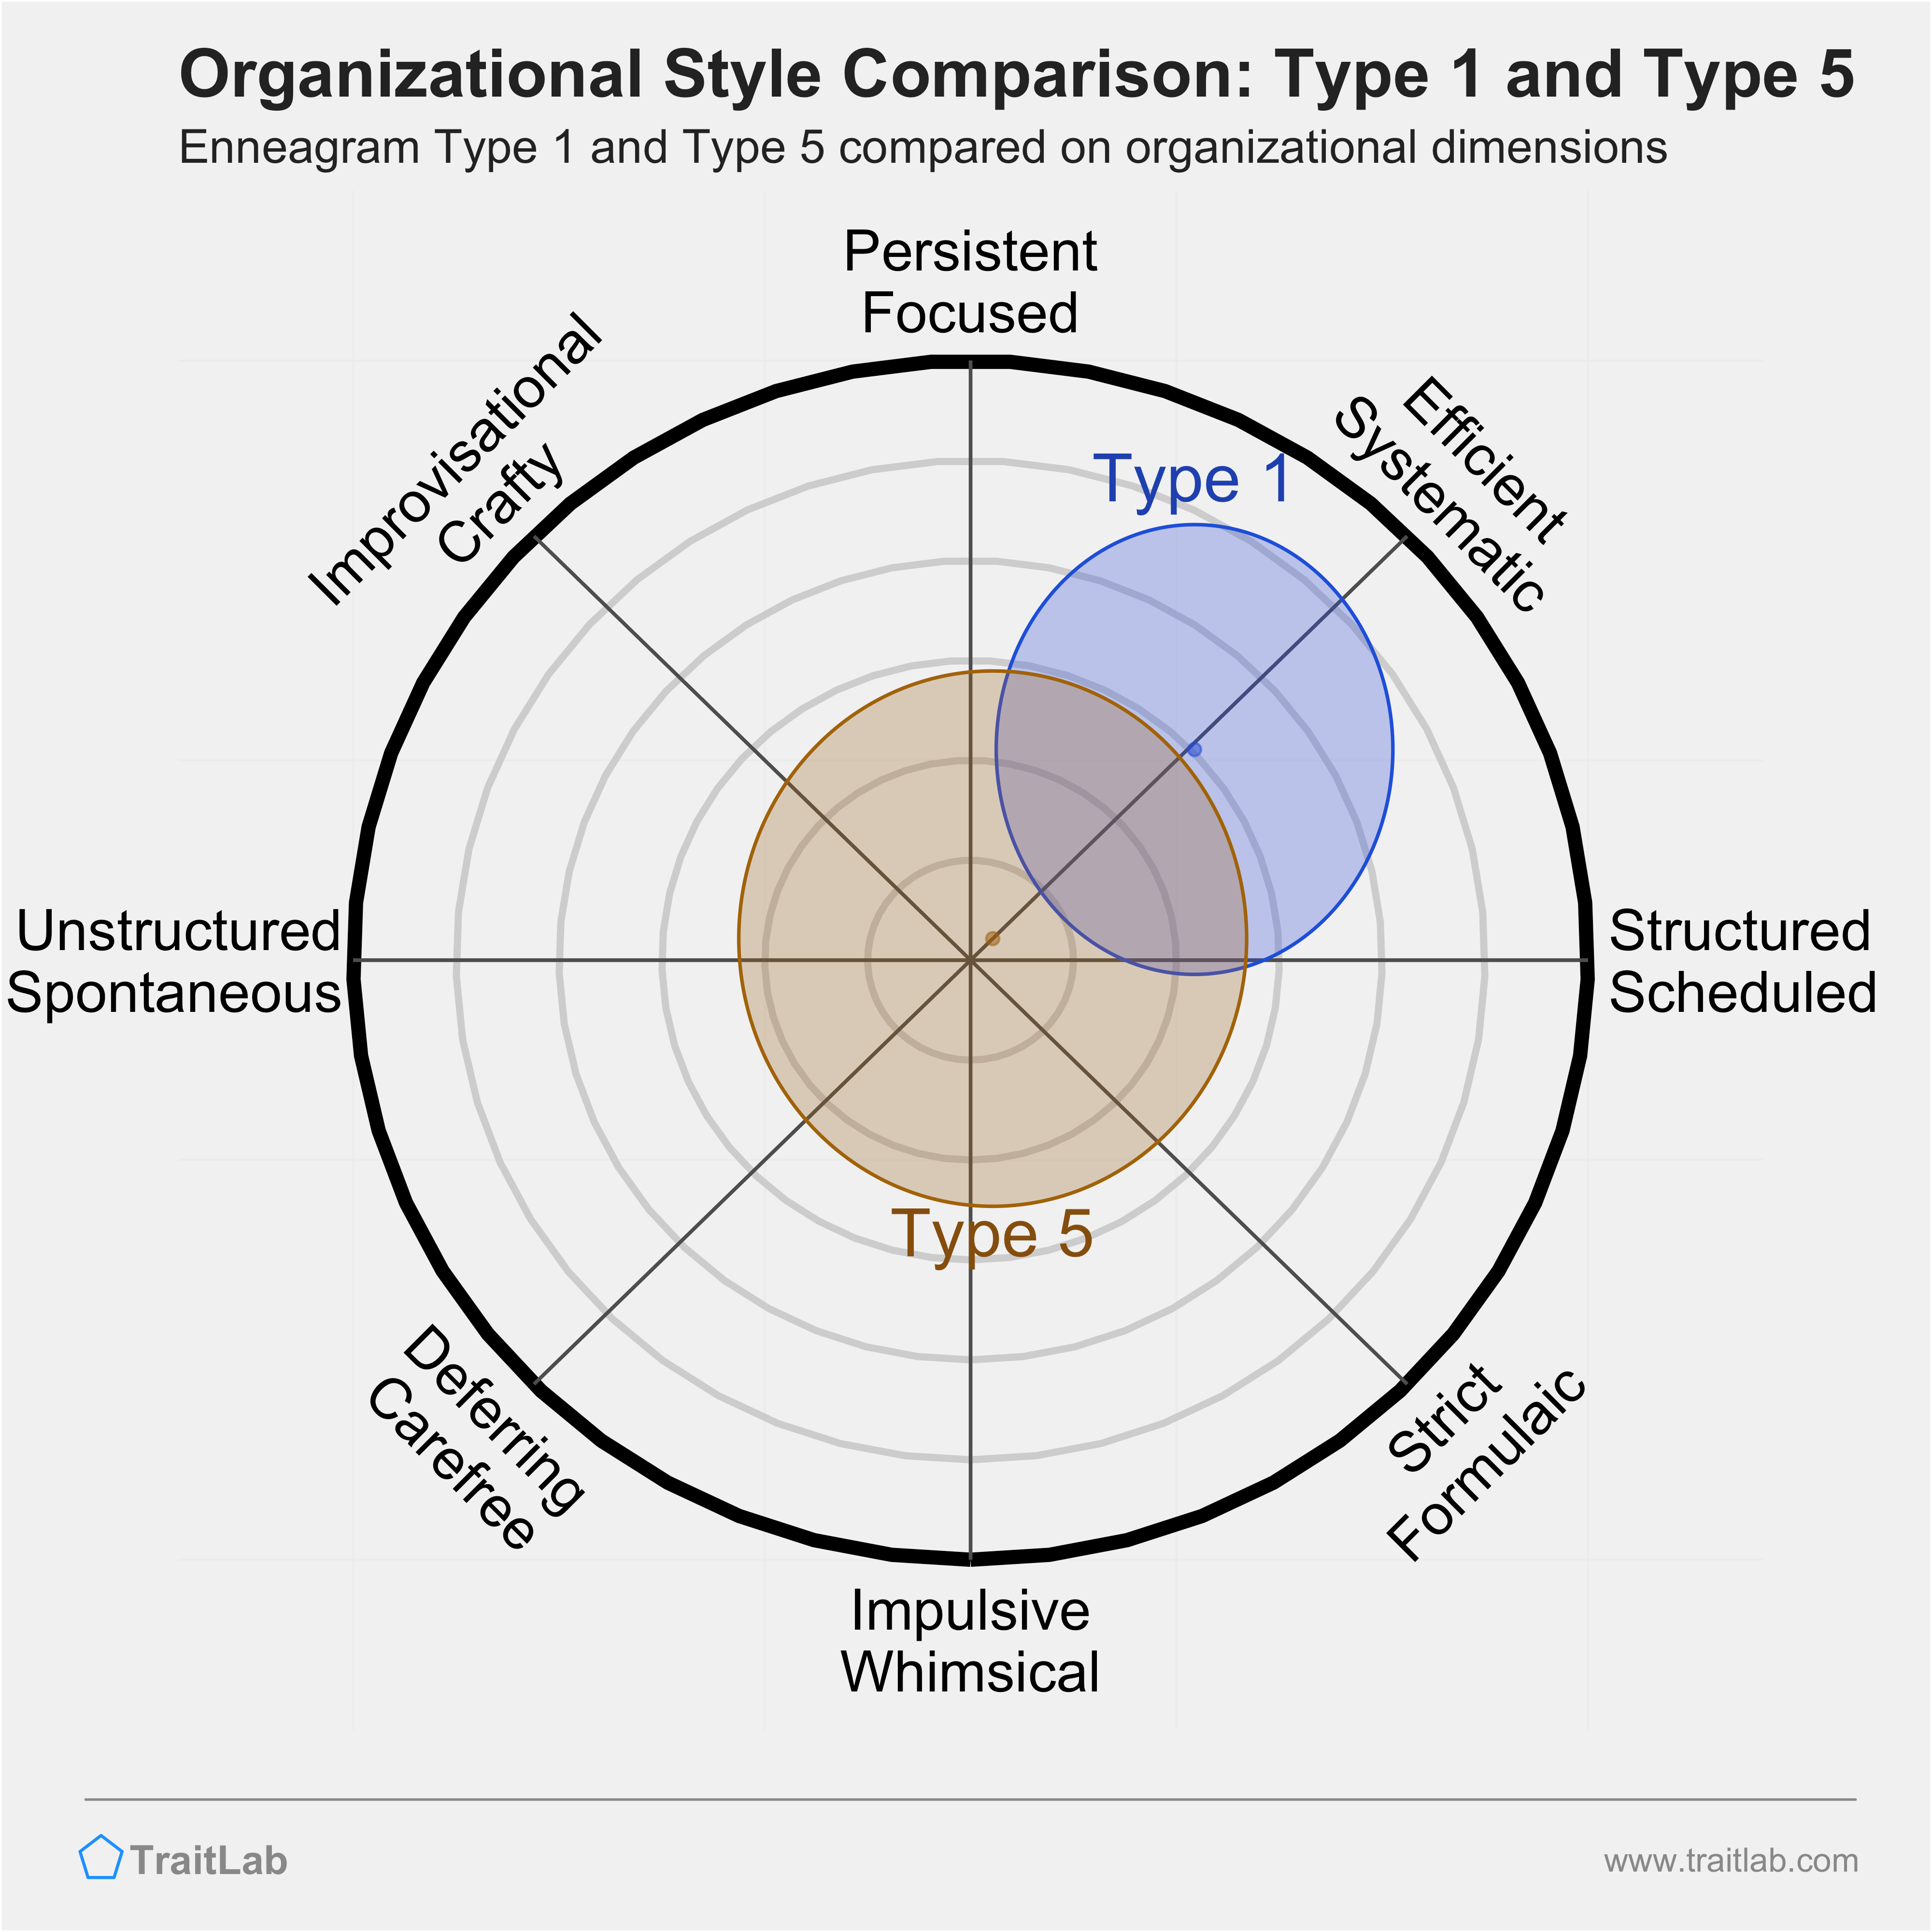 Type 1 and Type 5 comparison across organizational dimensions